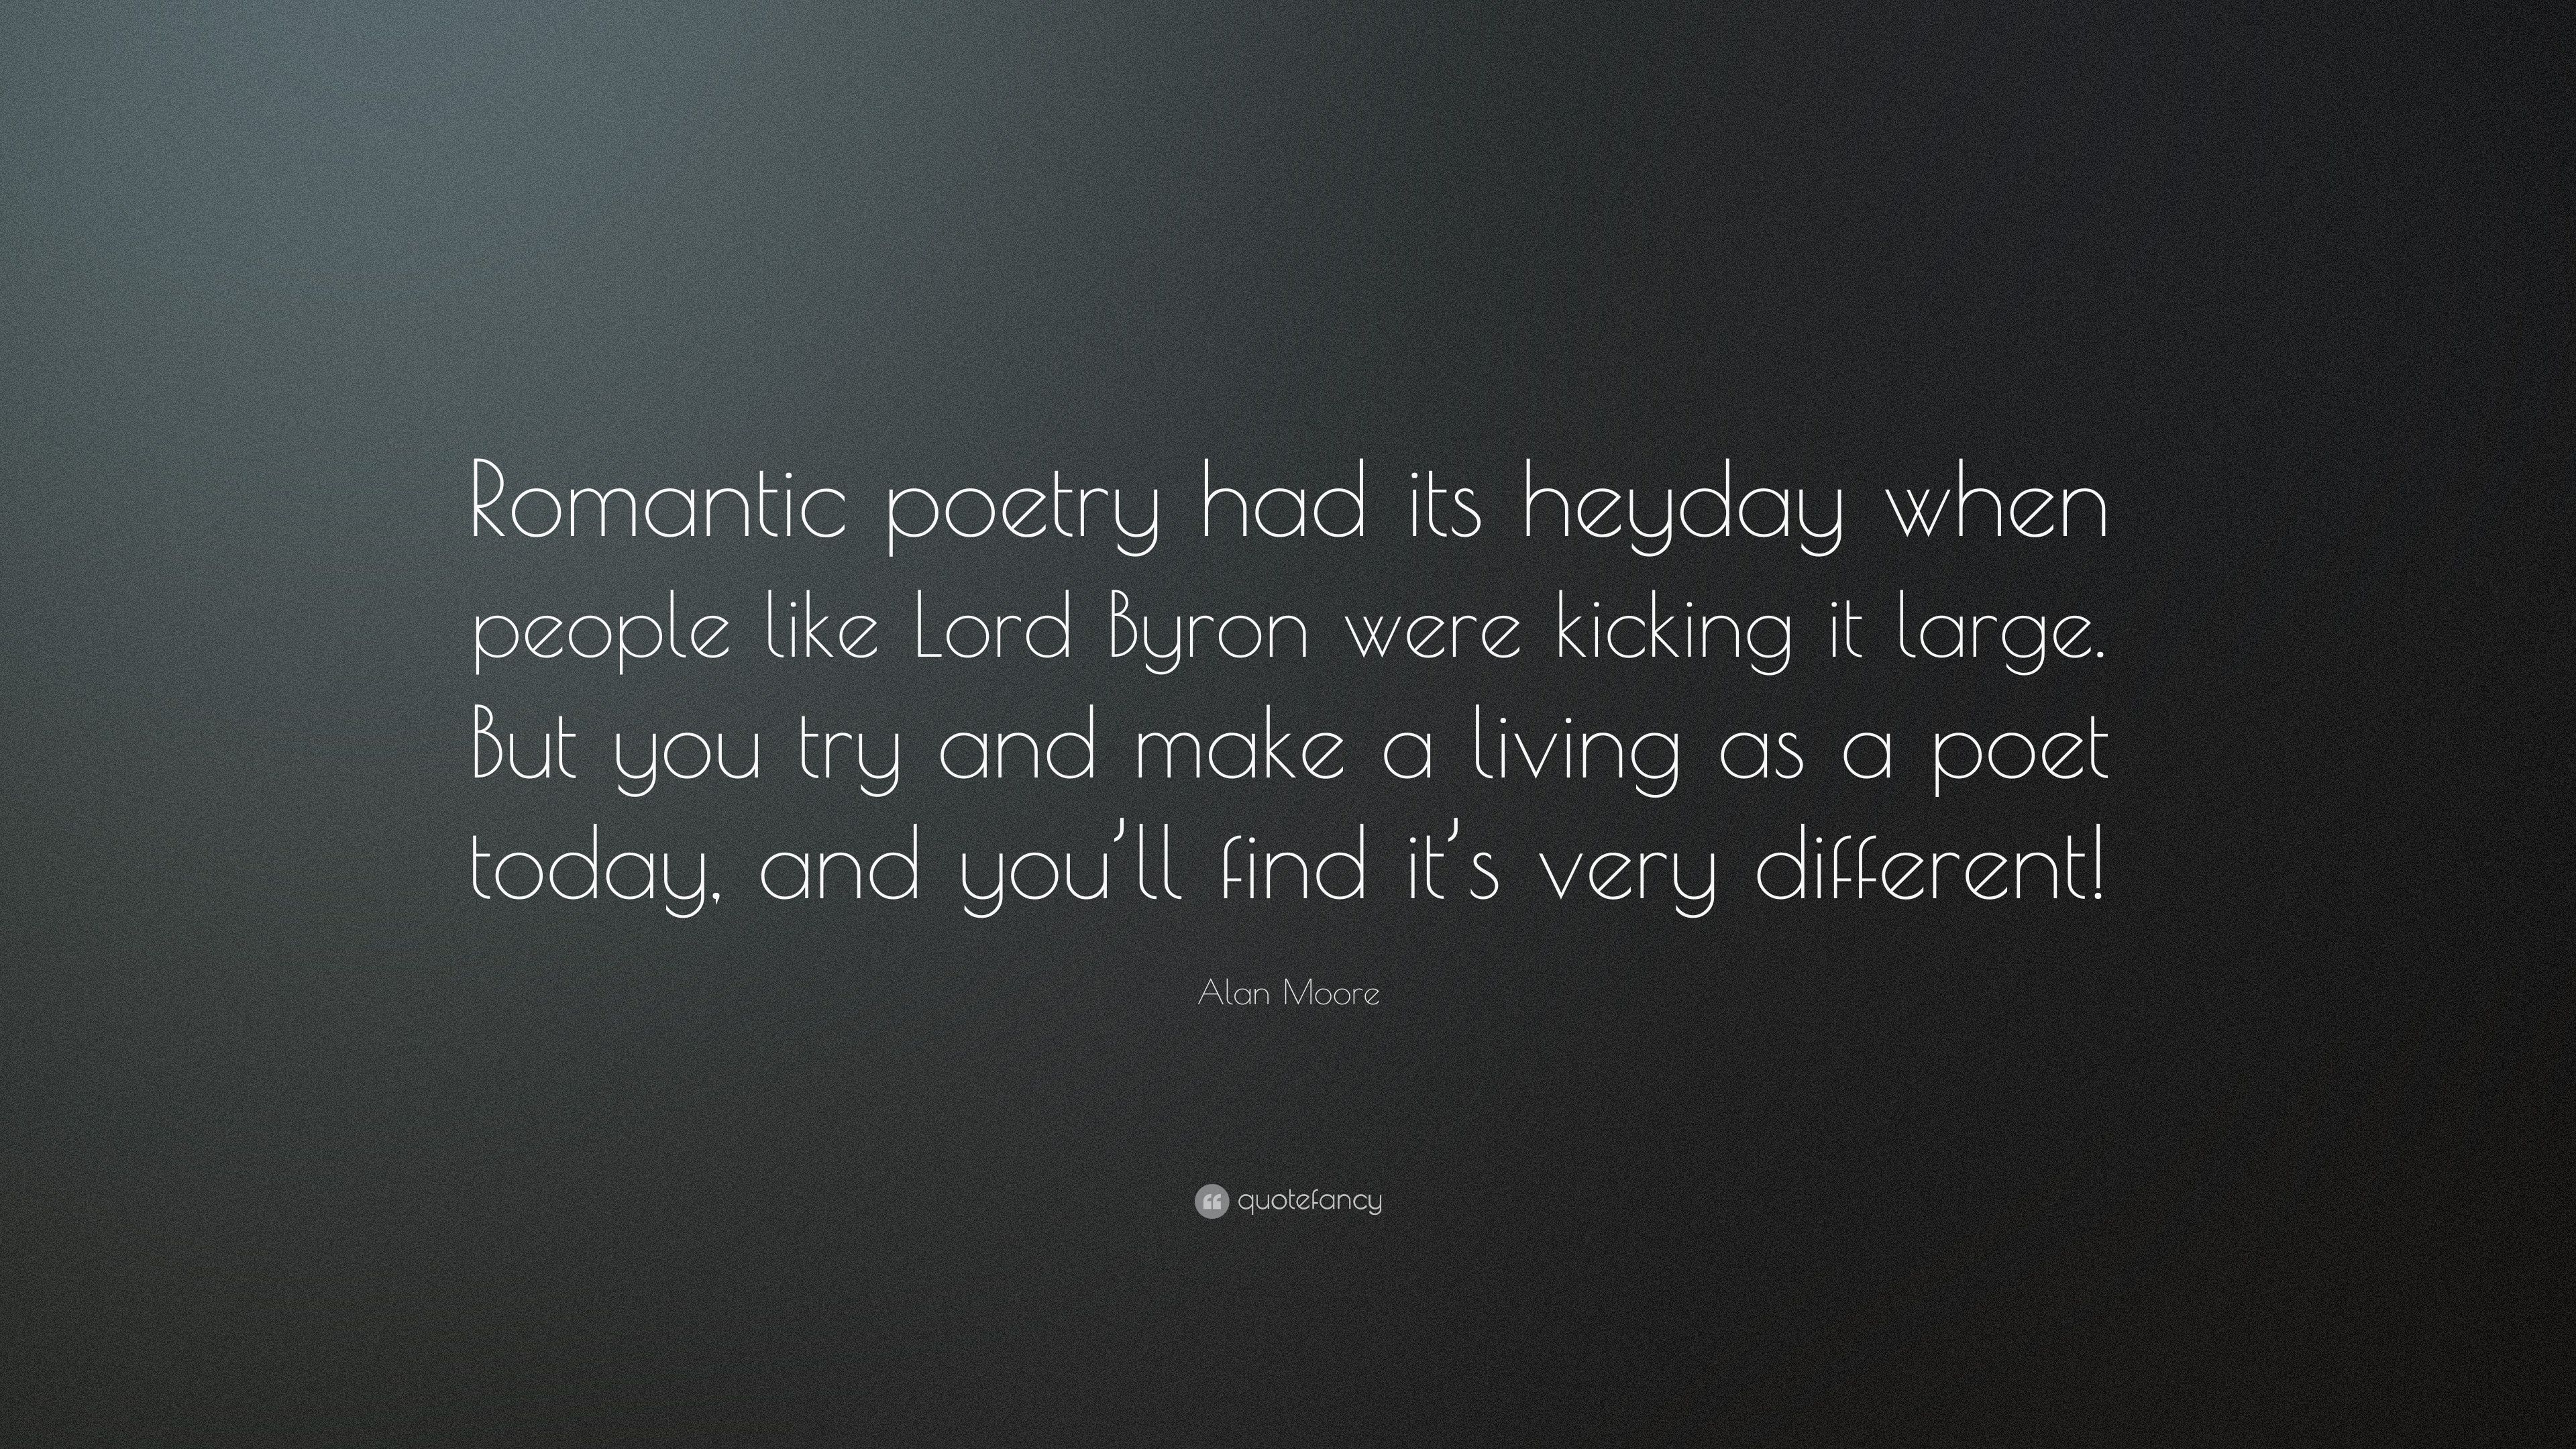 Alan Moore Quote: “Romantic poetry had its heyday when people like